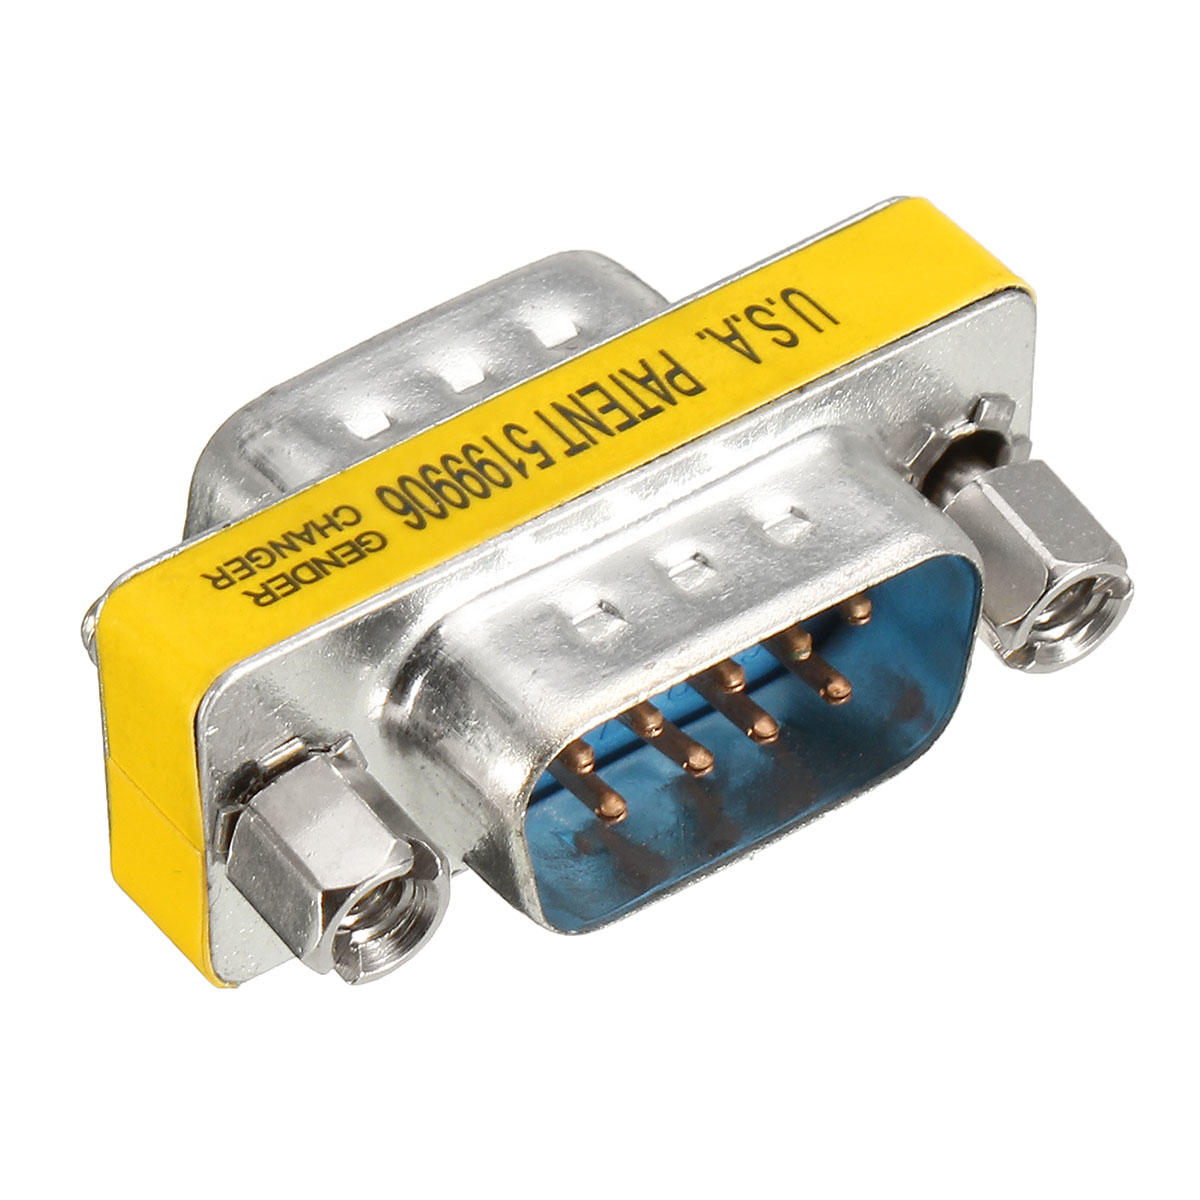 DB9 Serial Port Adapter Connector RS232 Converter Head - US$1.46 ...